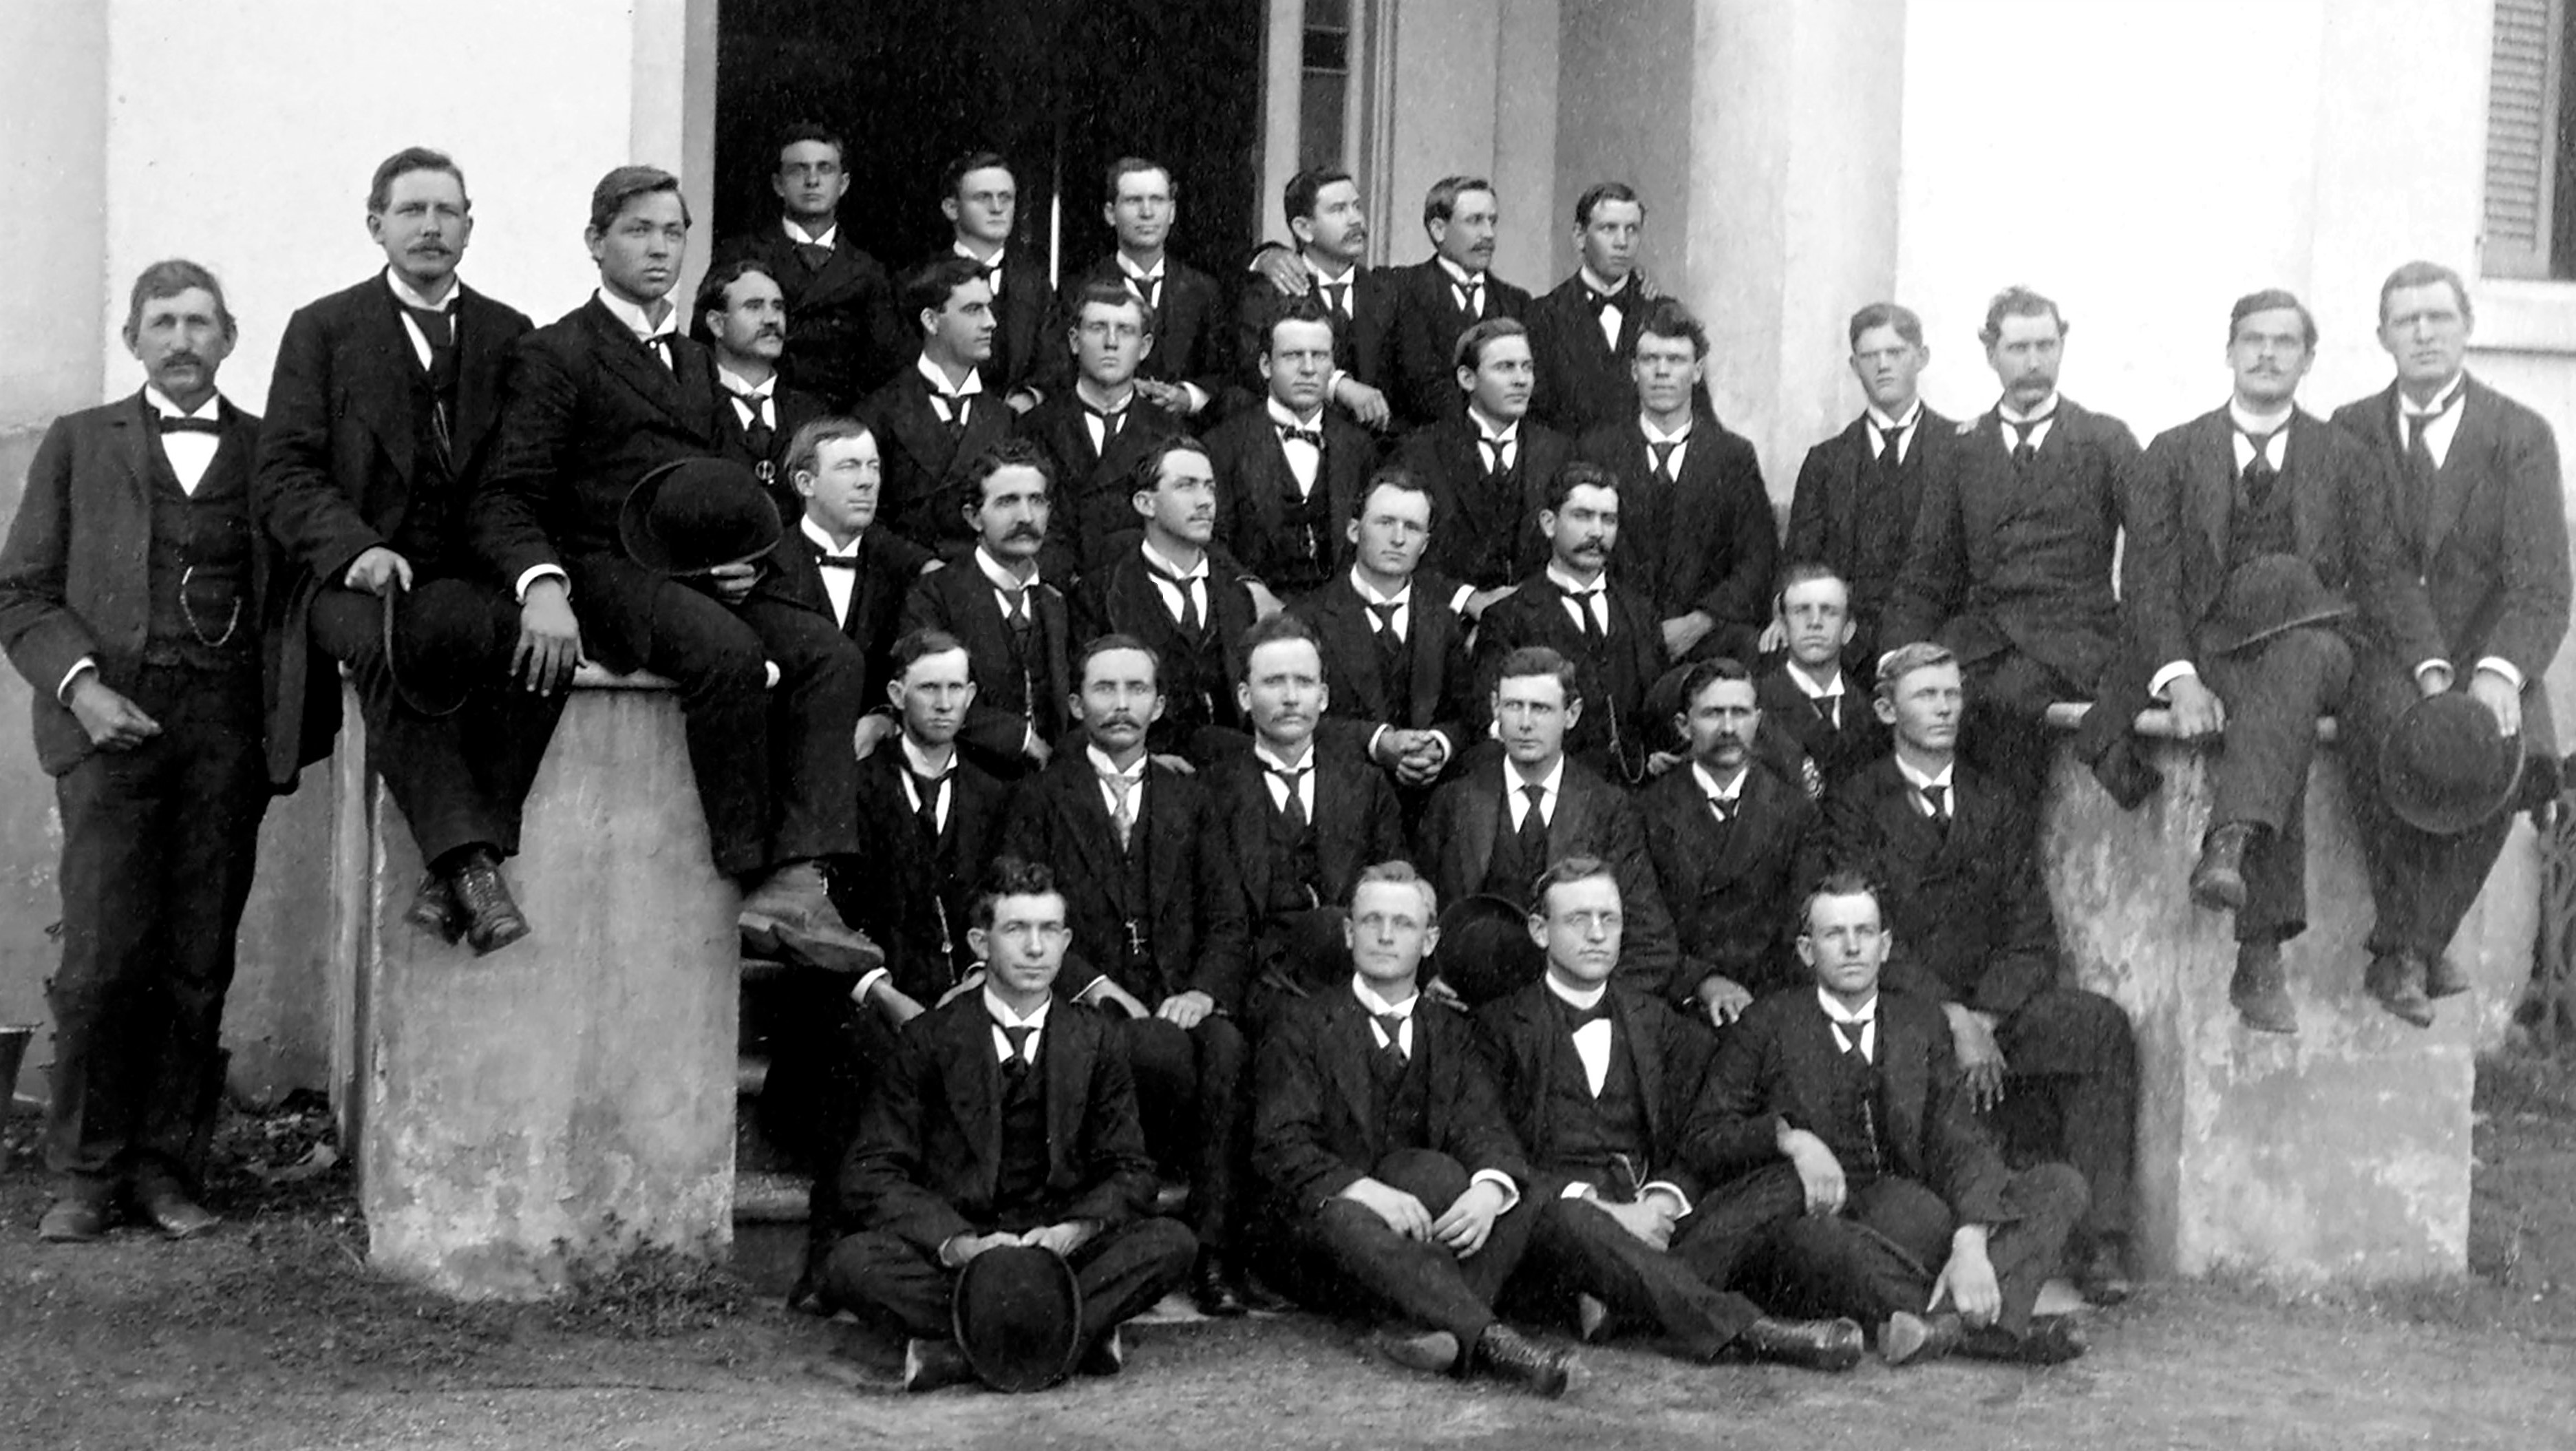 1899/3: South Alabama Conference - Southern States Mission,  1899 March 31